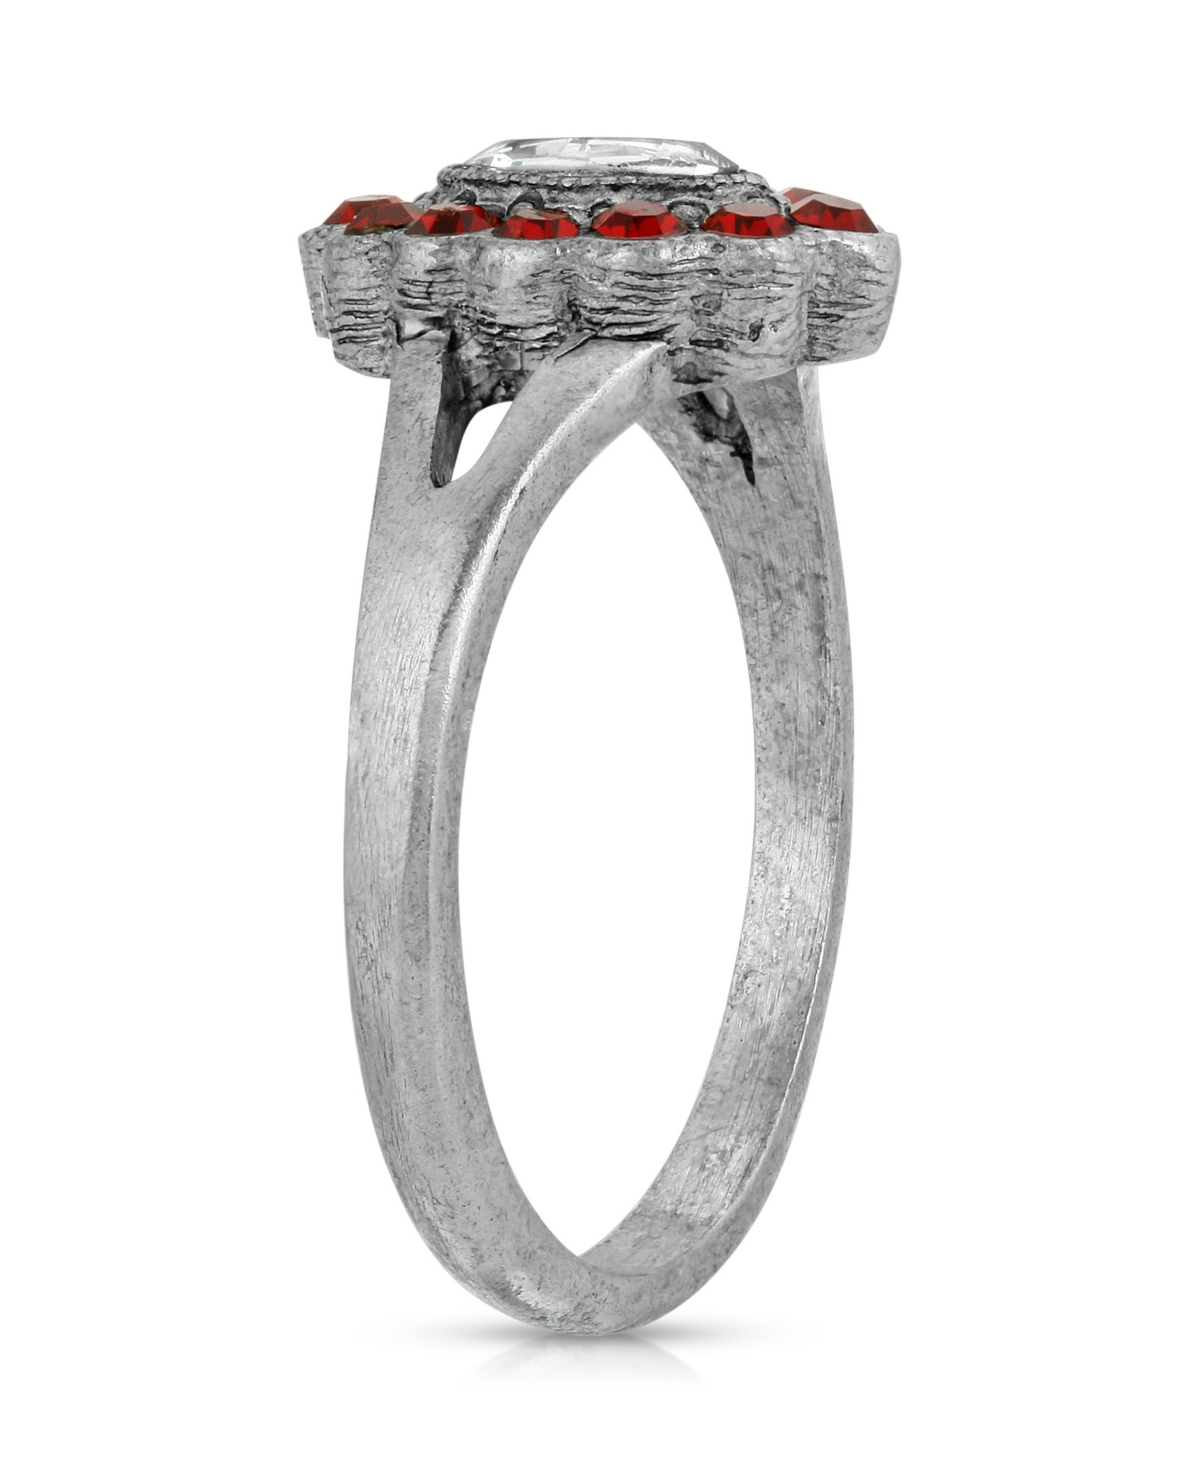 Shop 2028 Pewter Diamond Shaped Crystal Ring In Red